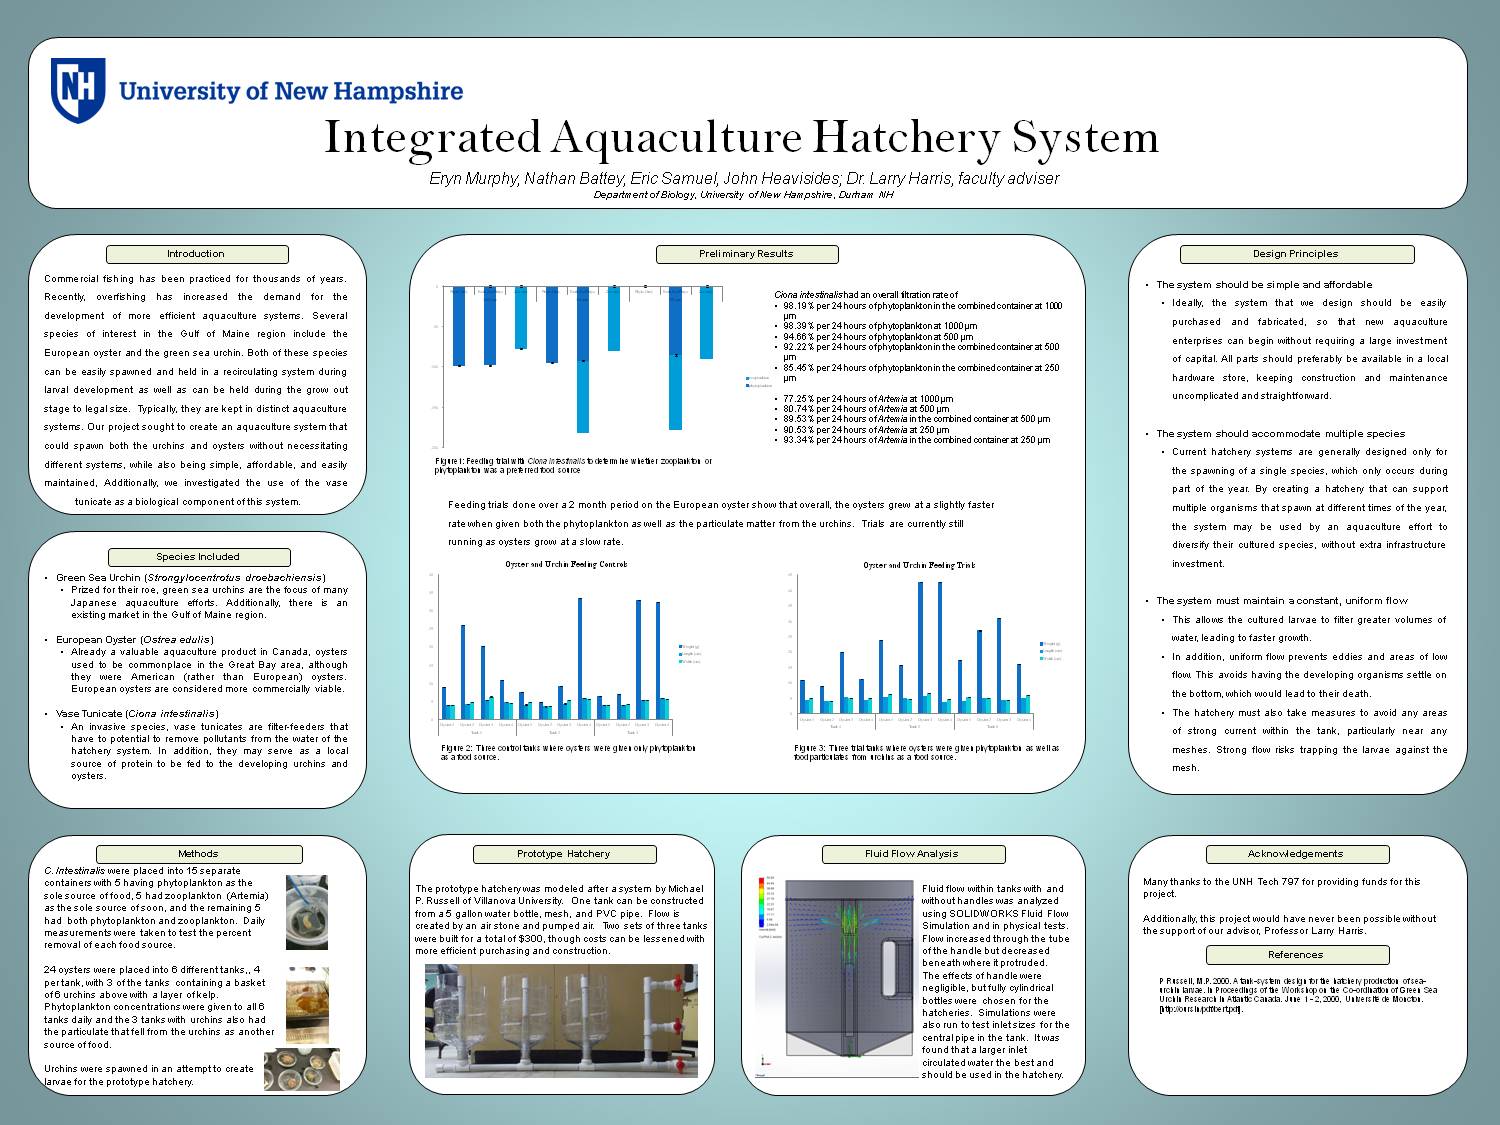 Integrated Aquaculture Hatchery System by jheavisides